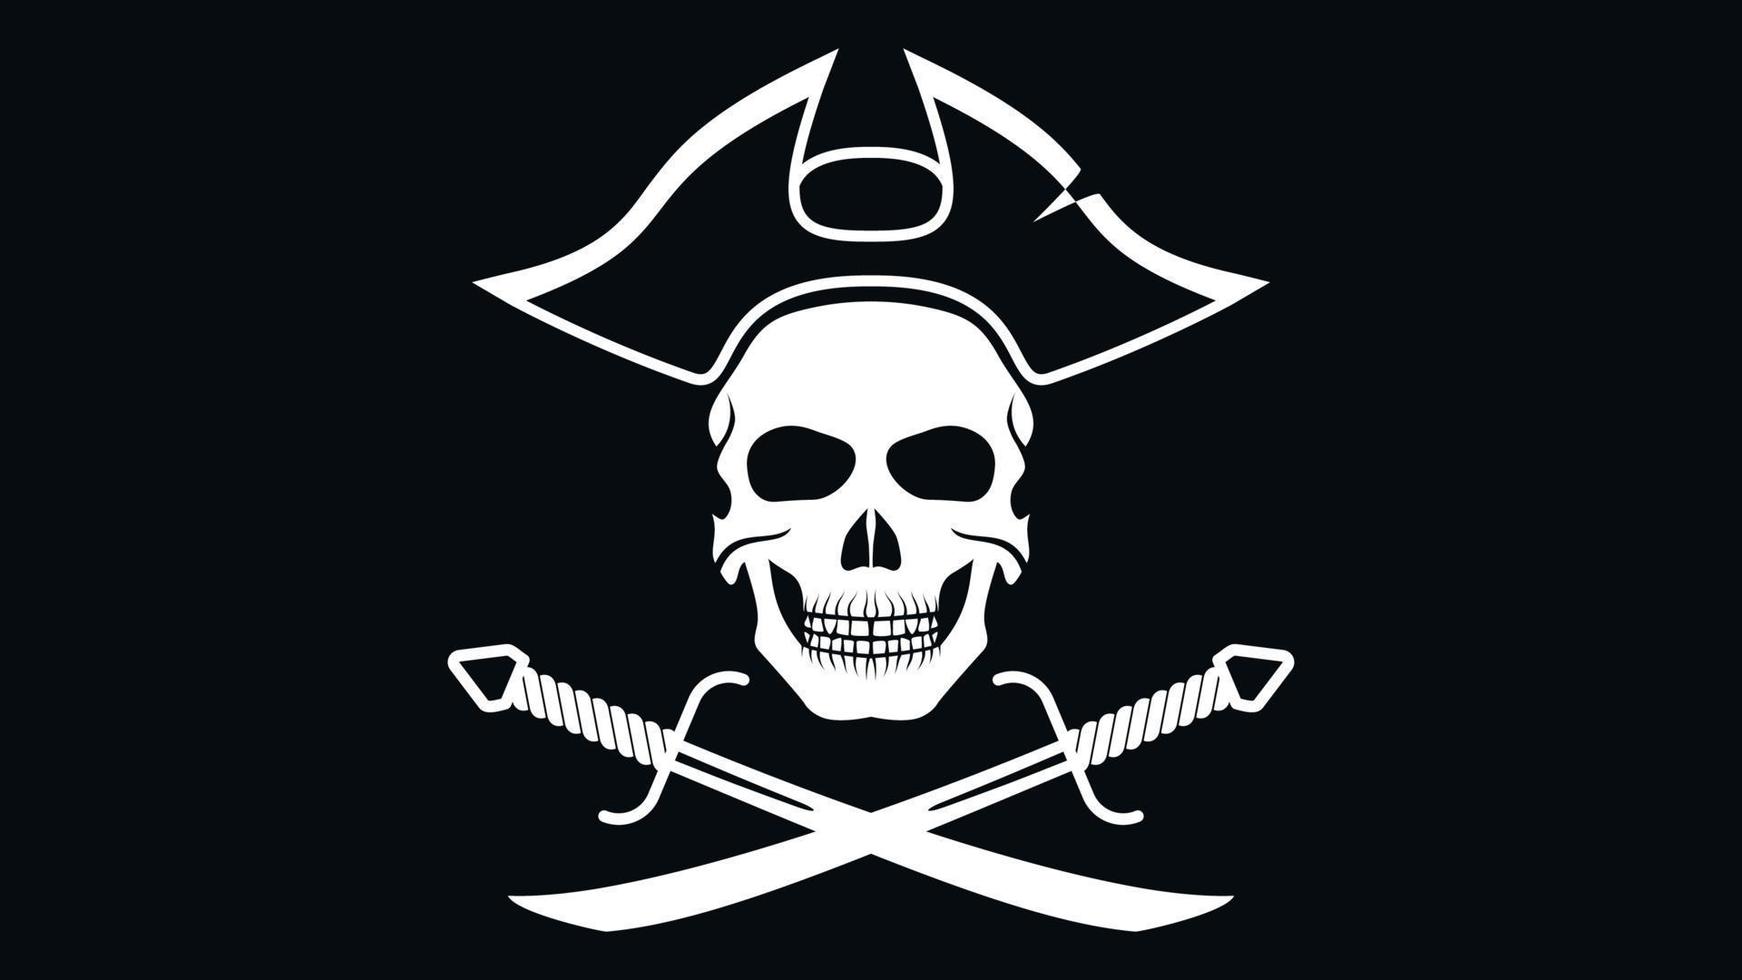 Black pirate flag with skull and sabers vector